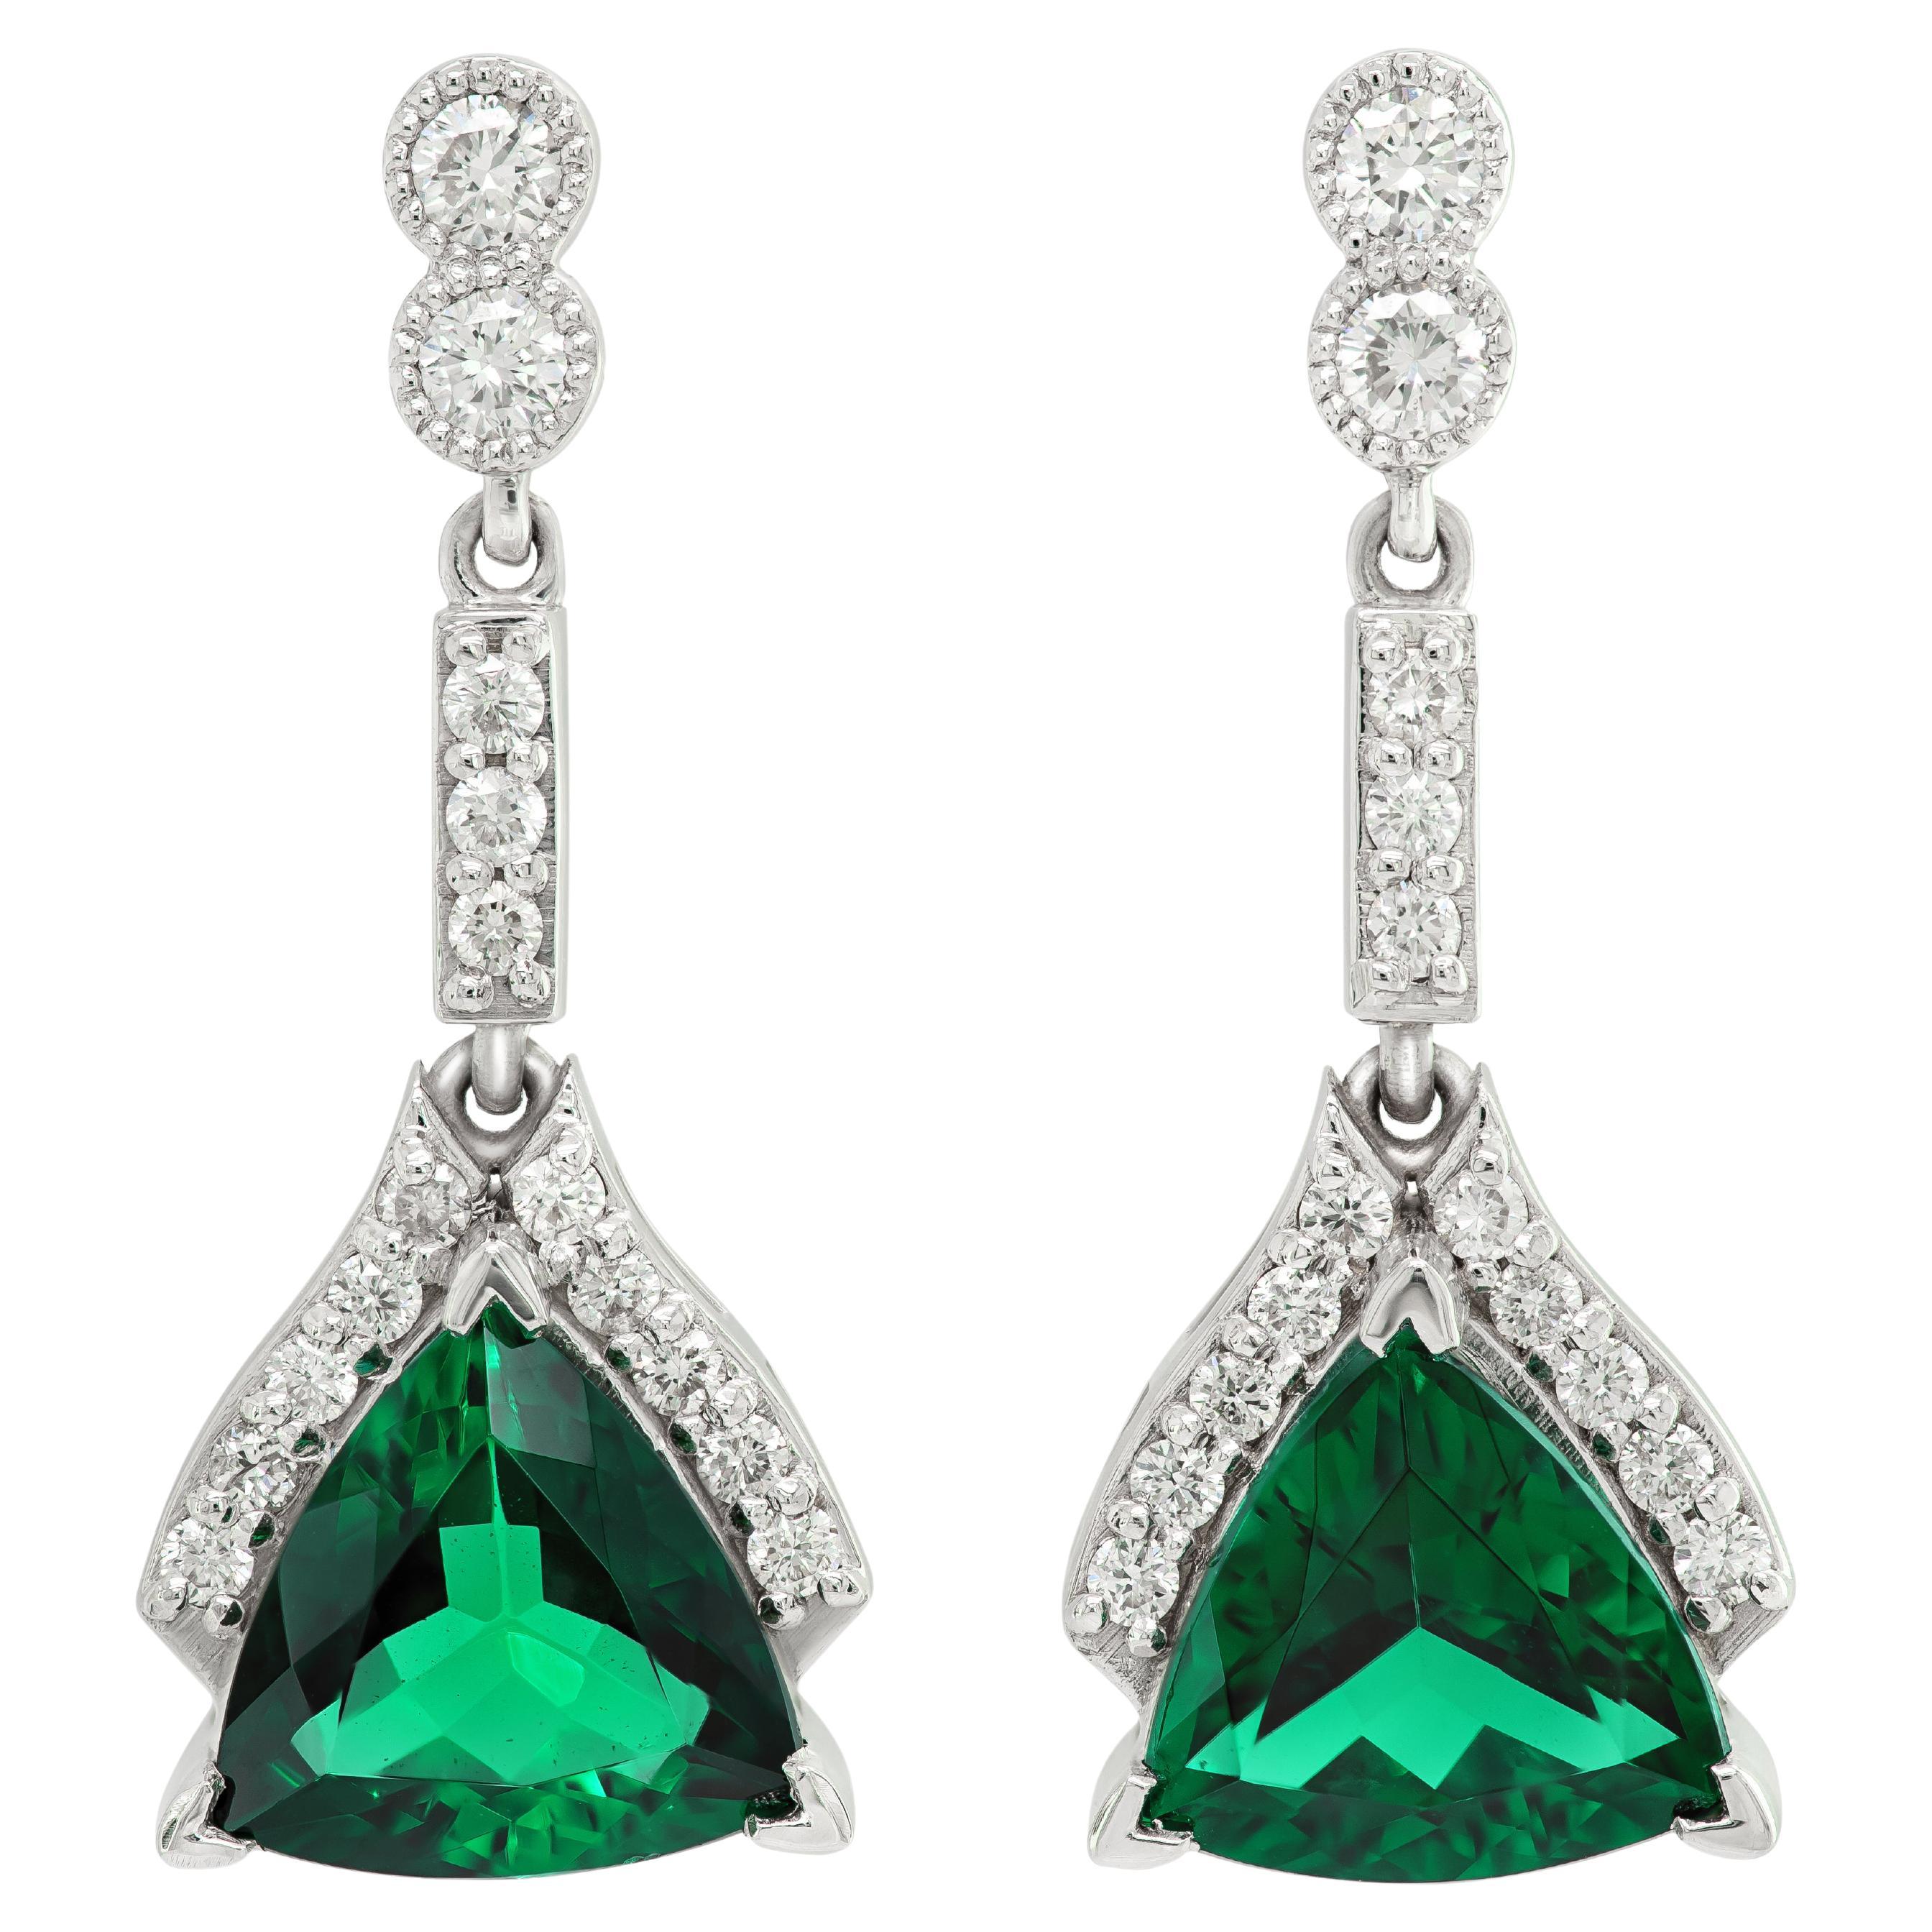  Natural Blue-Green Tourmaline 2.89 Carats in White Gold Earrings with Diamonds For Sale